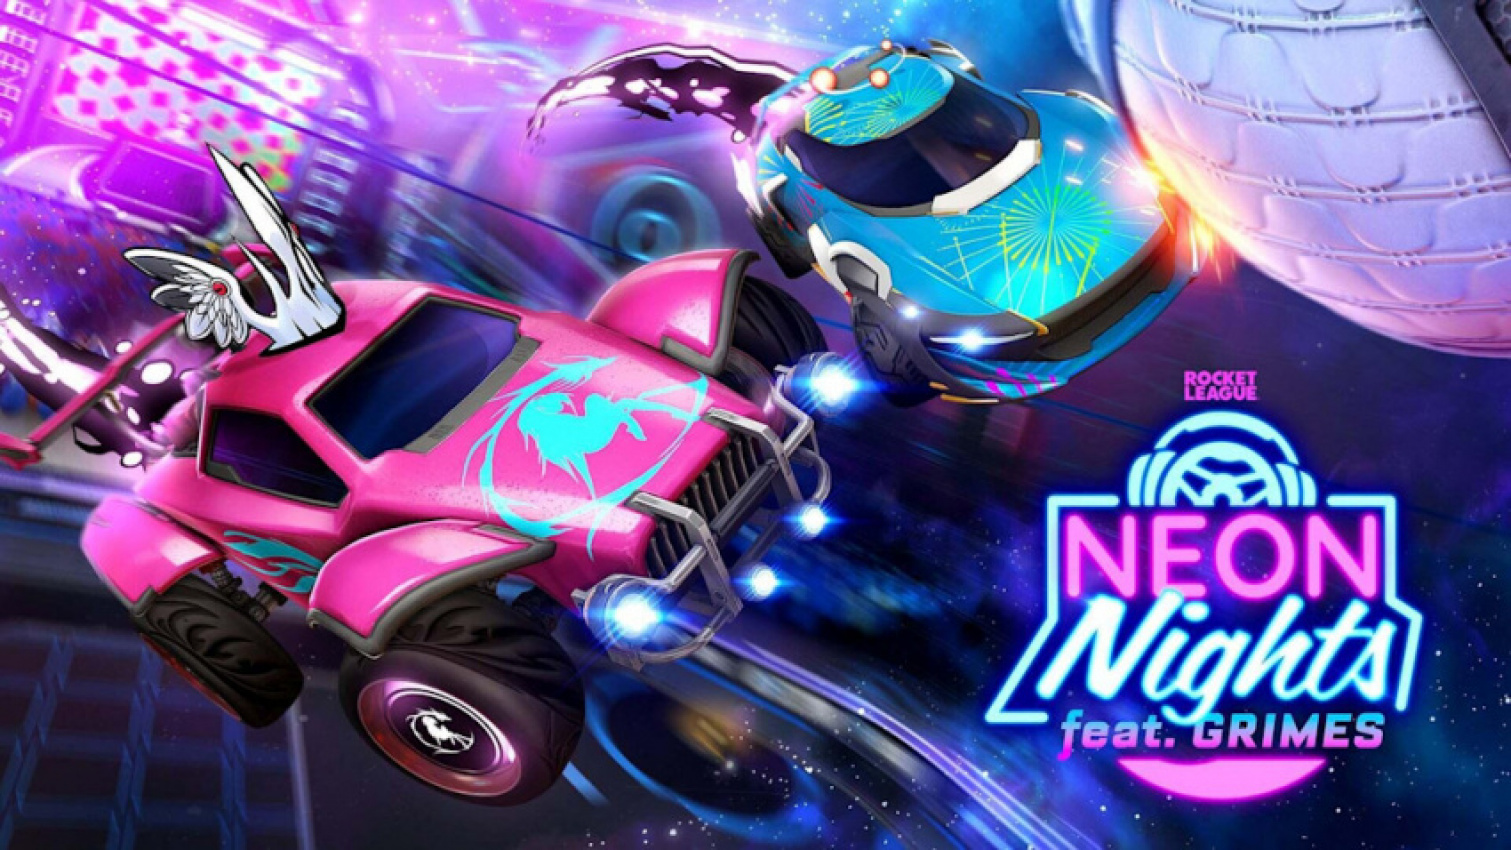 autos, cars, toys/games, commerce, gaming roundup, hot wheels, rocket league, 'rocket league's' latest event is very neon | gaming roundup